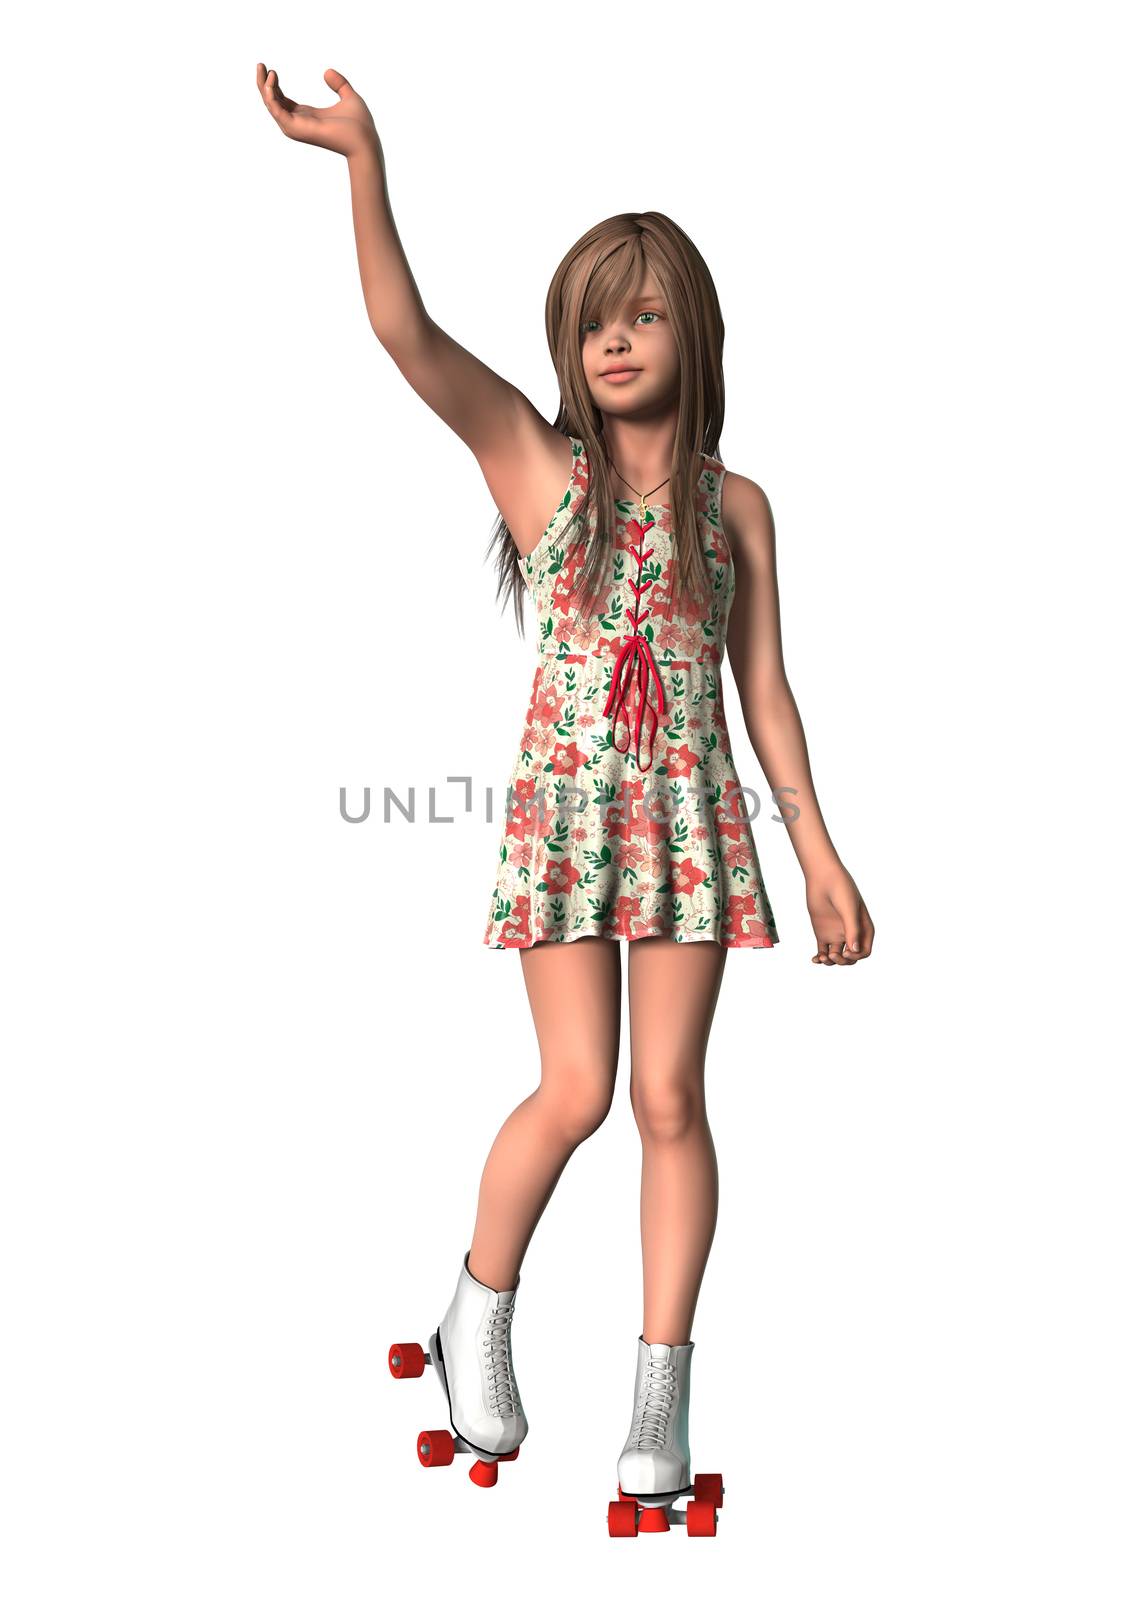 3D digital render of a cute girl on inline skates isolated on white background